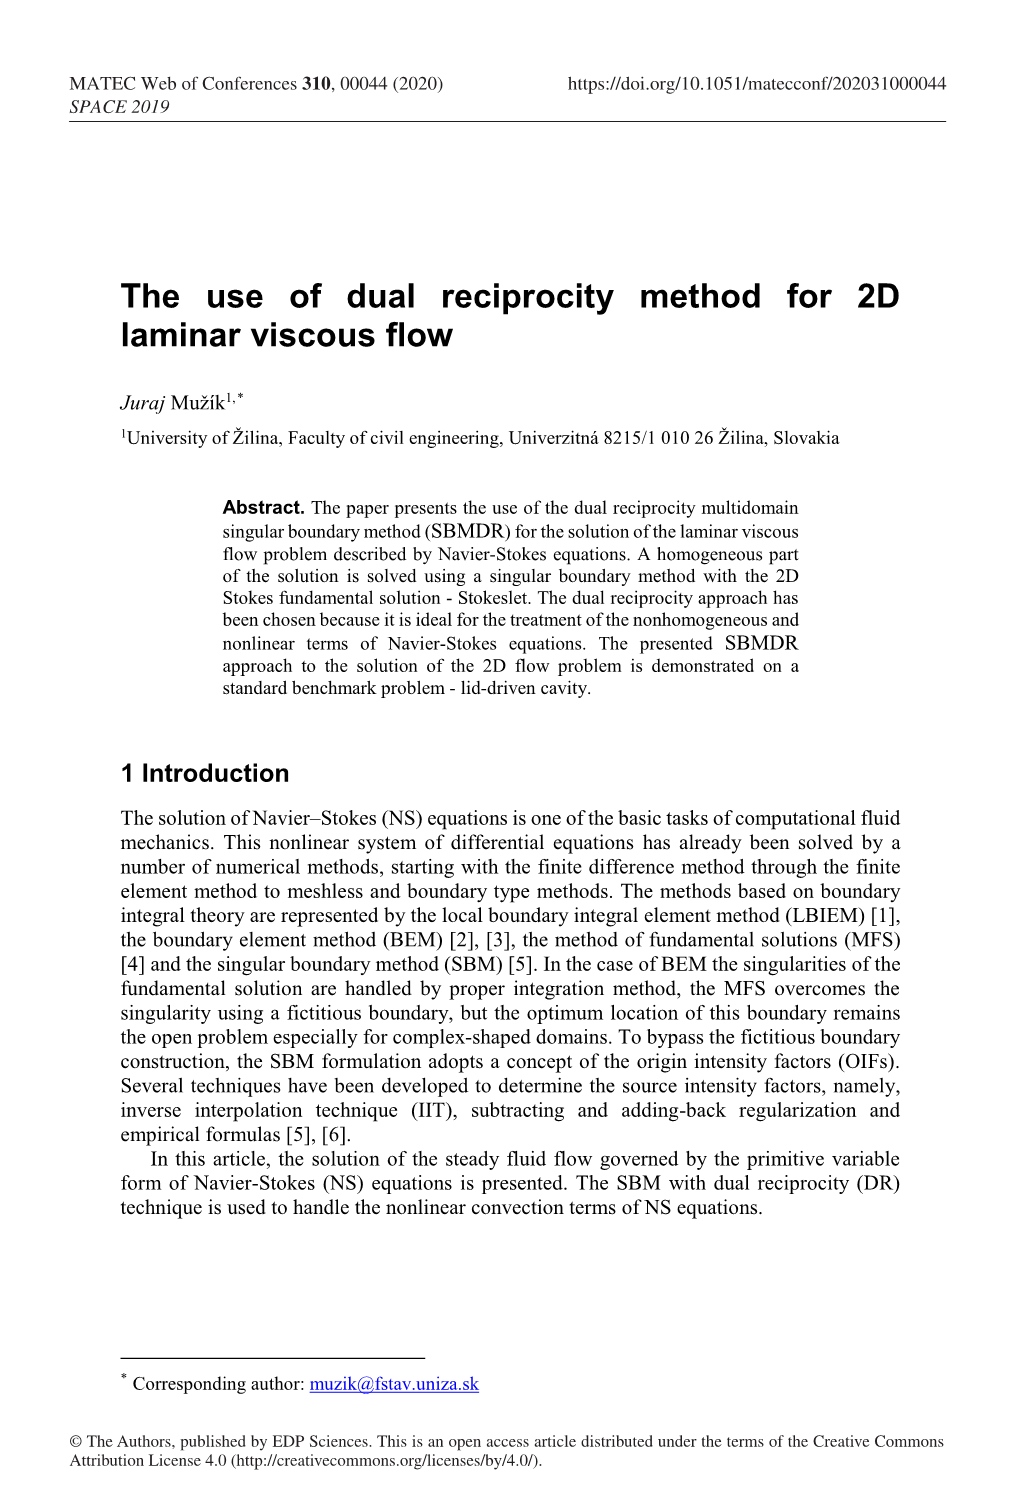 The Use of Dual Reciprocity Method for 2D Laminar Viscous Flow